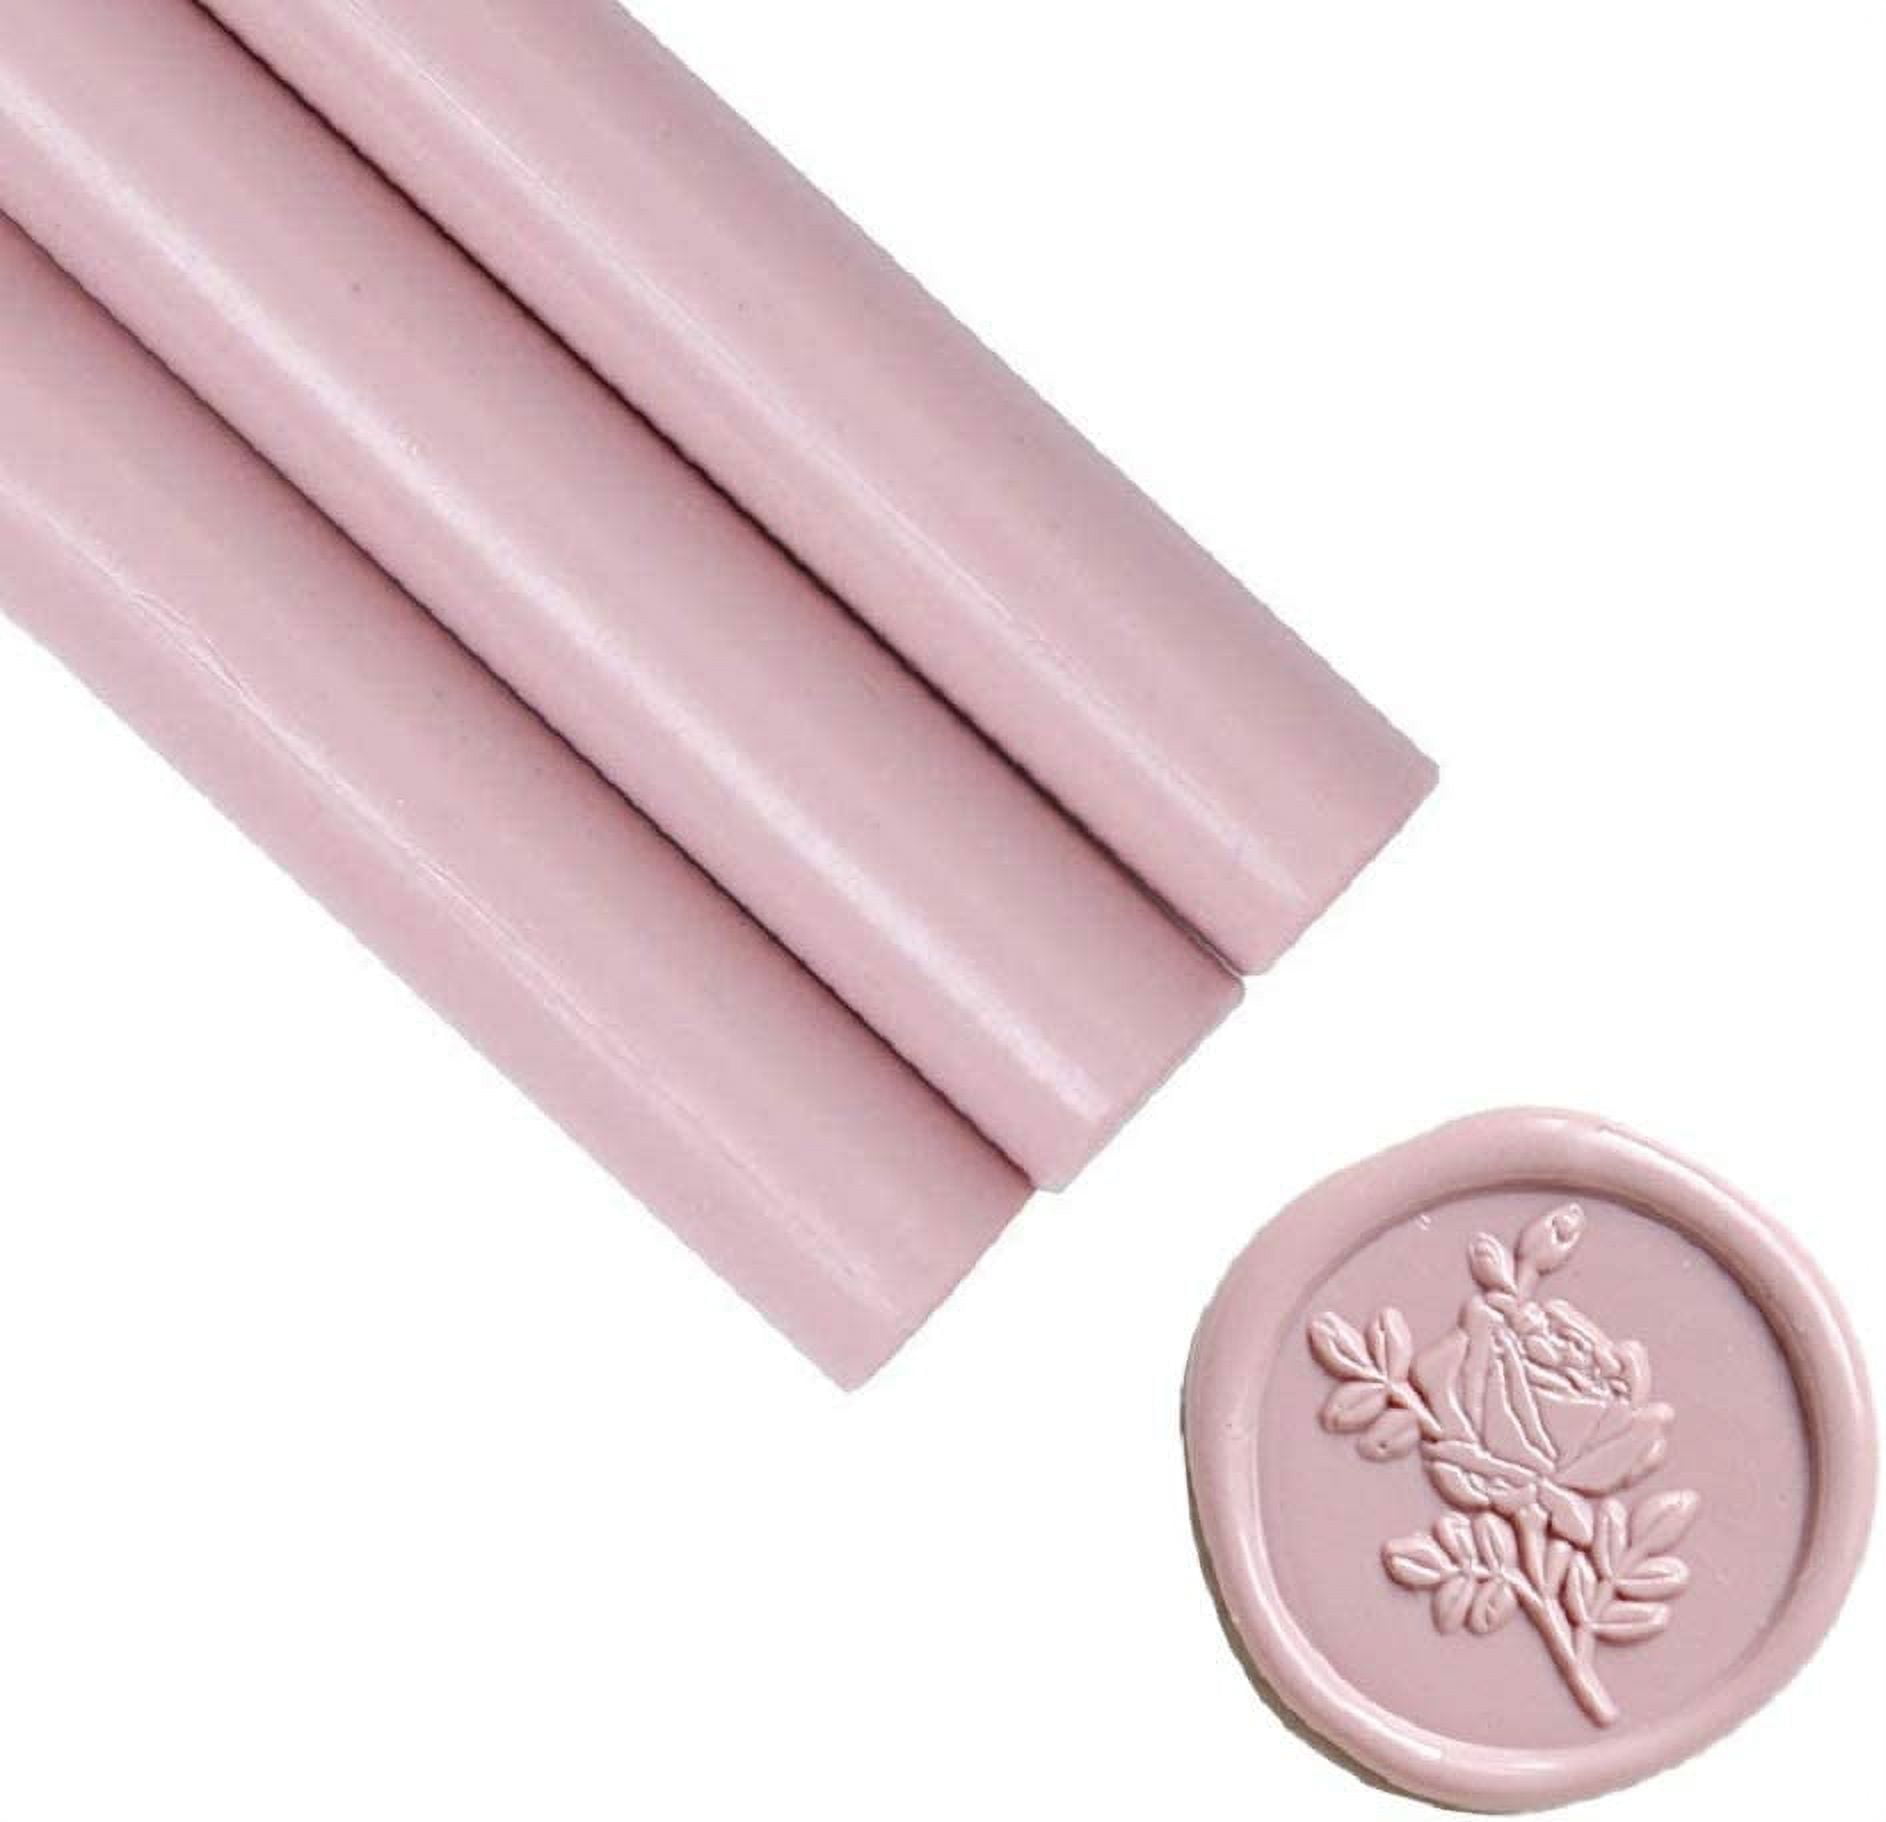 UNIQOOO Mailable Glue Gun Sealing Wax Sticks for Wax Seal Stamp - Metallic Gold, Great for Cards, Wedding Invitations, Envelopes, Snail Mails, Wine